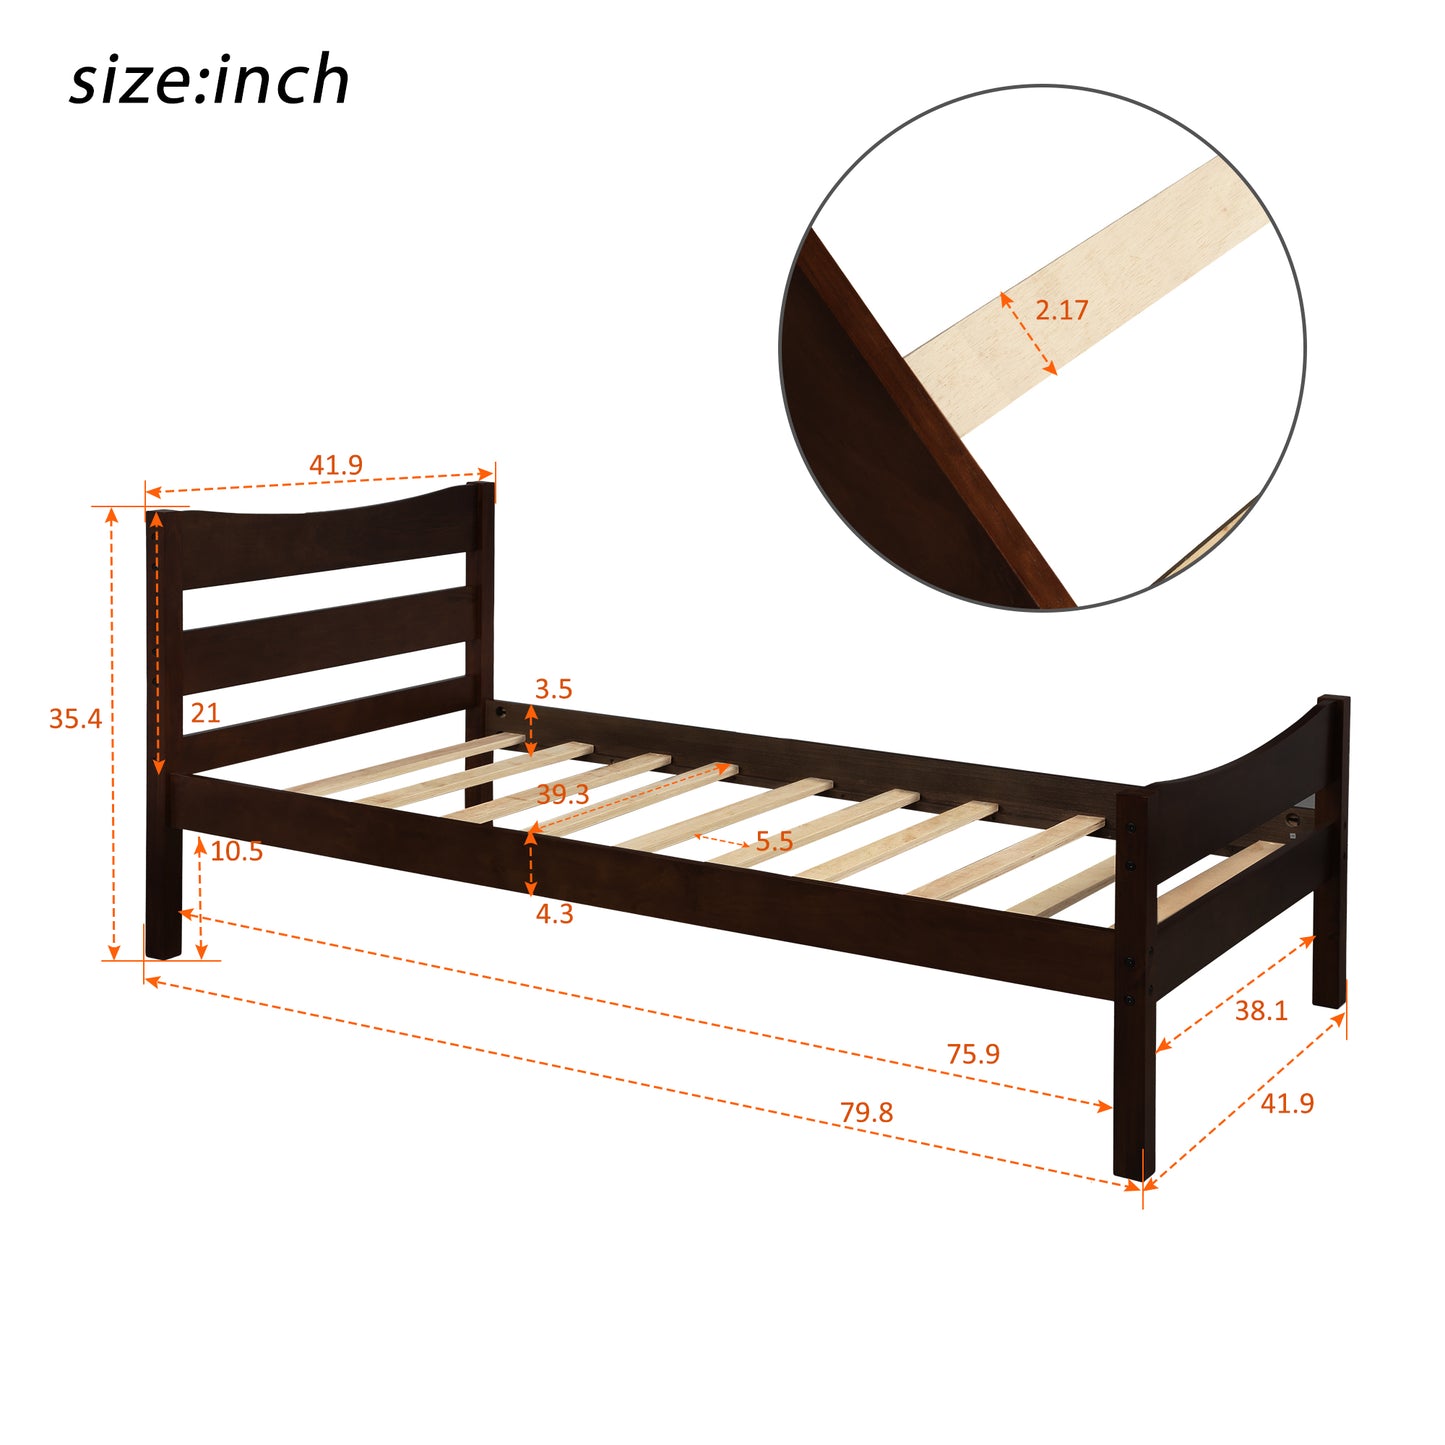 SYNGAR Twin Size Wood Platform Bed Frame with Headboard and Footboard, Underbed Storage, Mattress Foundation with Strong Wooden Slat Support, No Box Spring Needed, Espresso